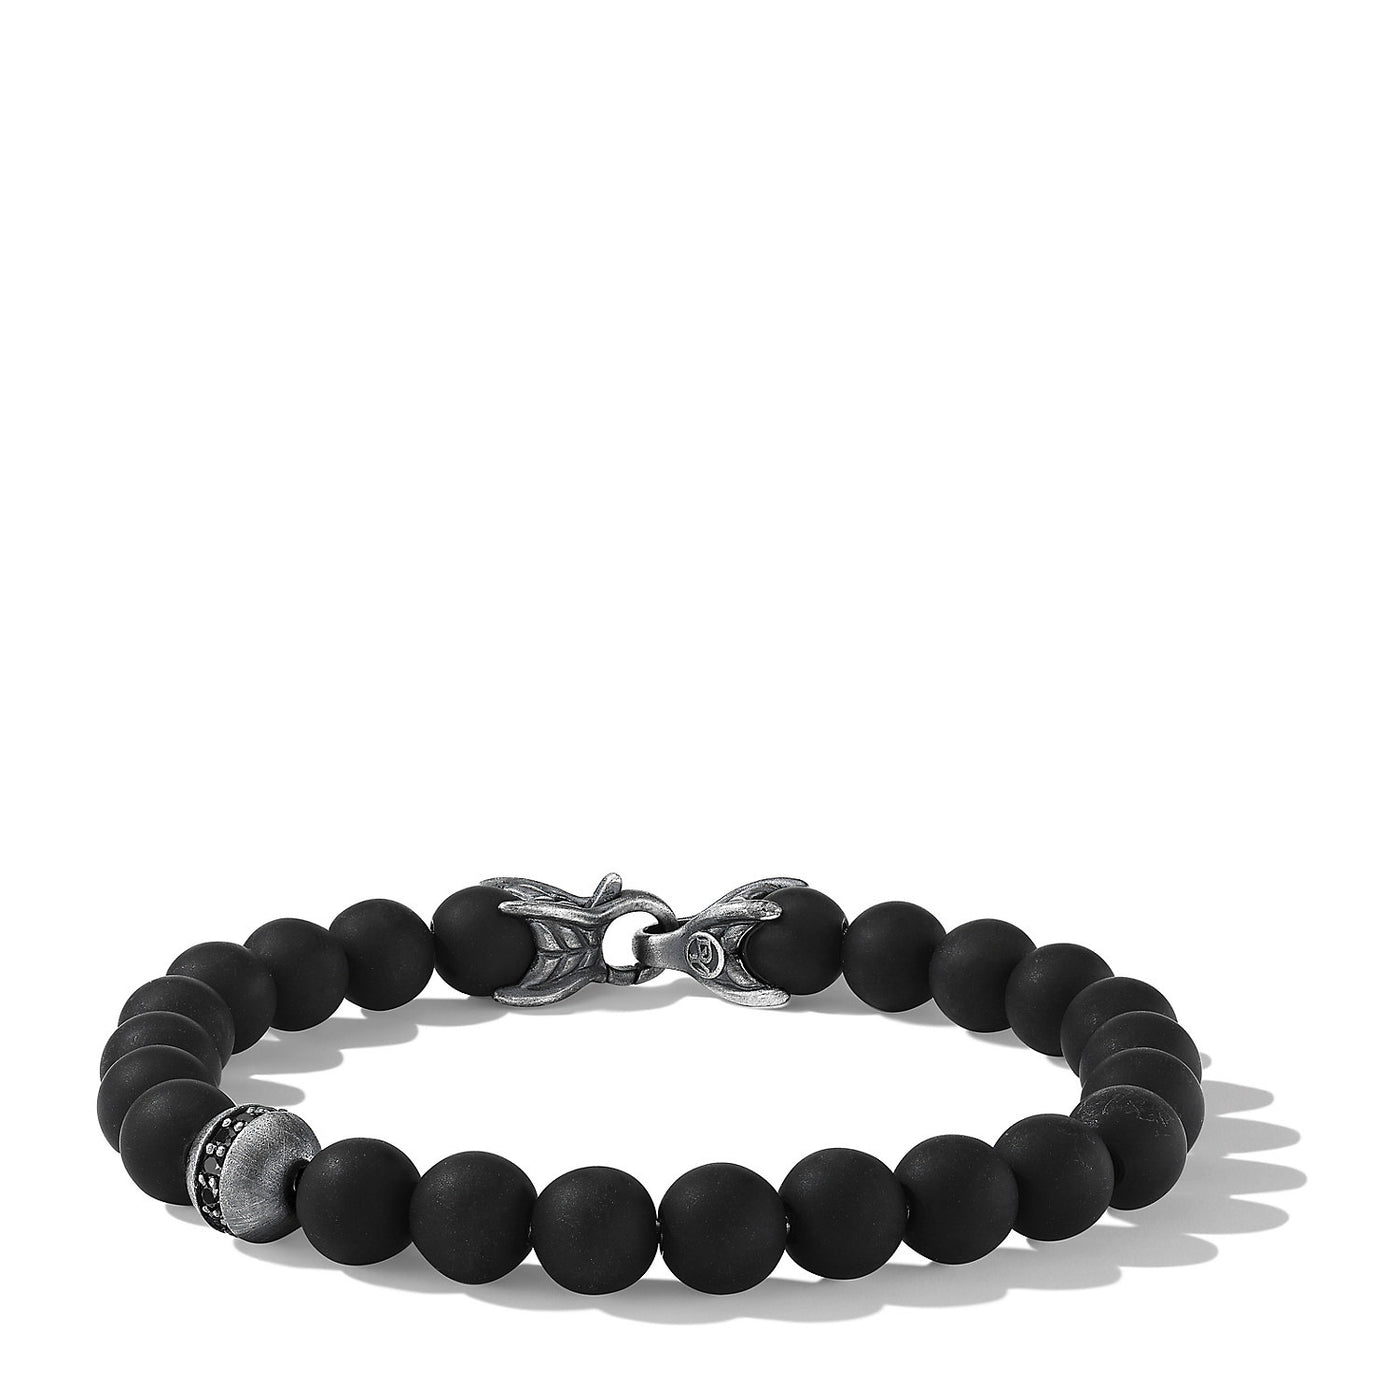 Spiritual Beads Bracelet in Sterling Silver with Black Onyx and Pavé Black Diamond Accent\, 8mm